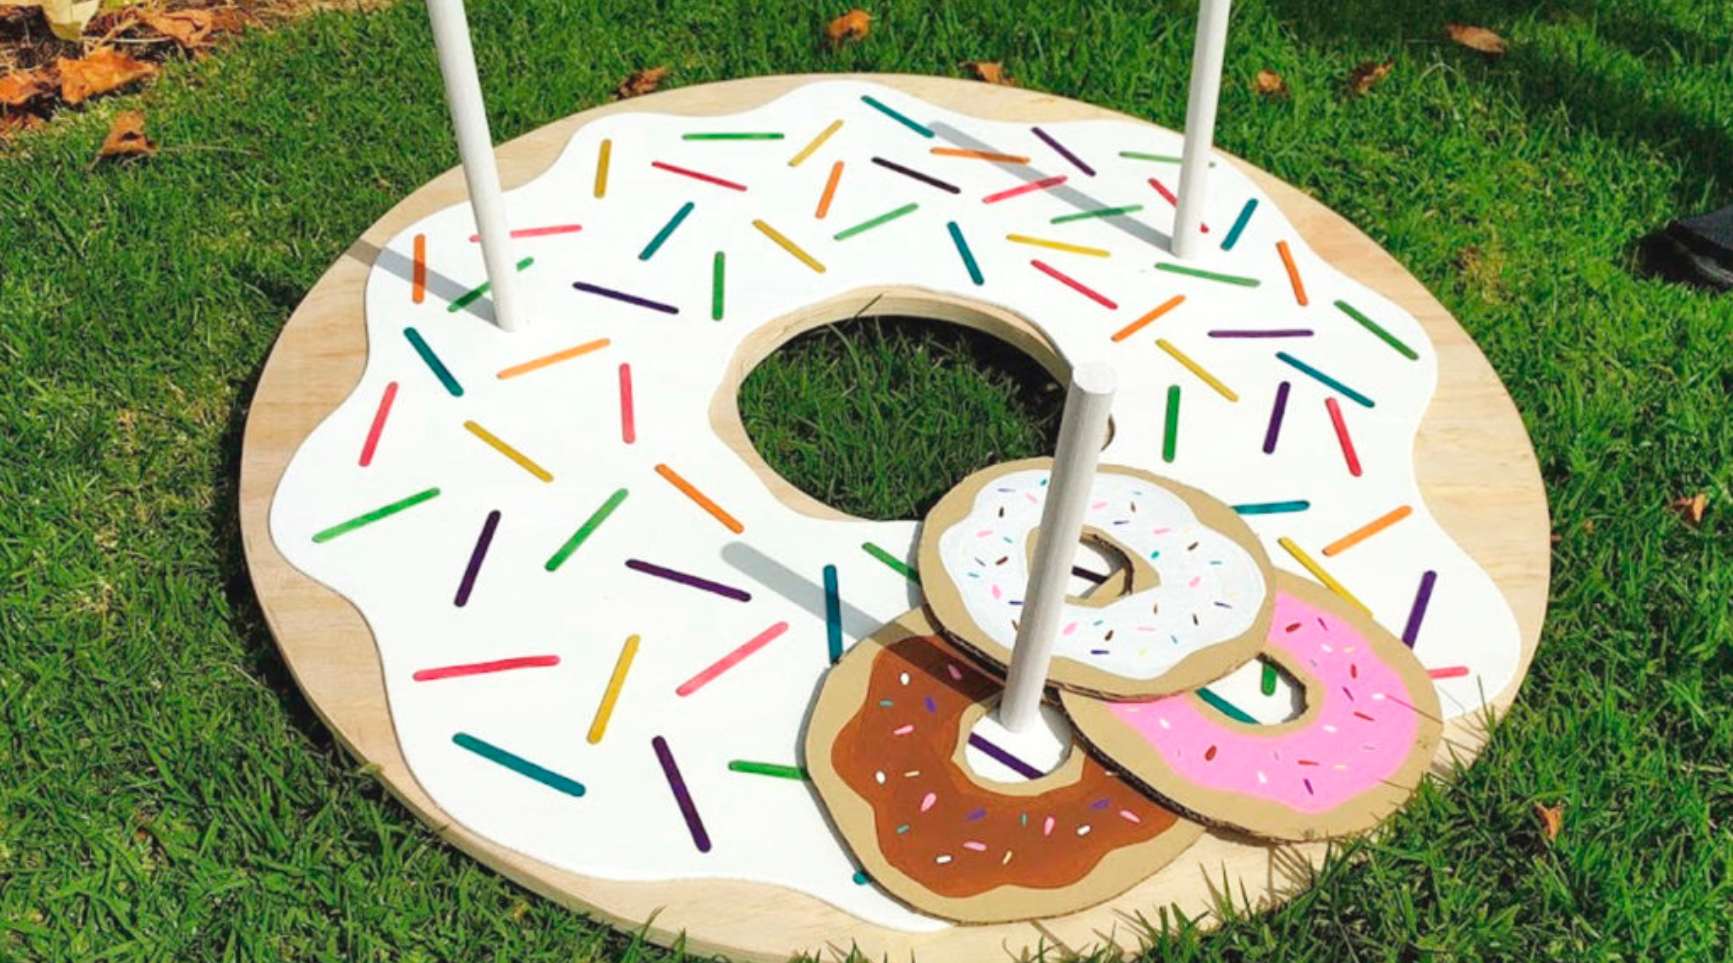 How To Make Rings For A Ring Toss Game